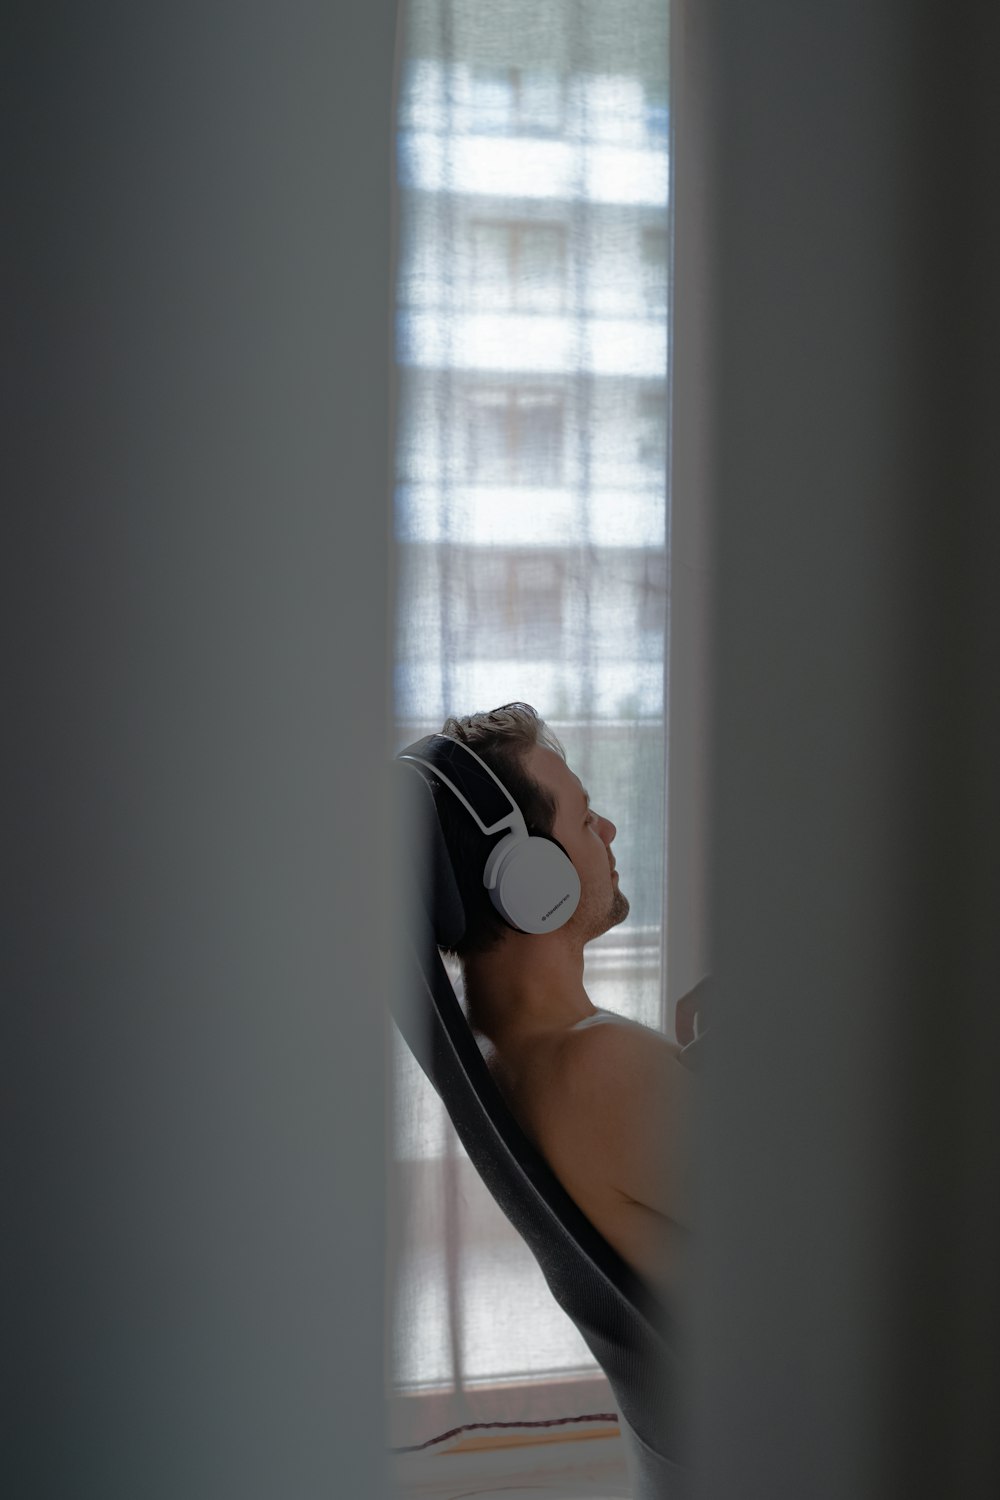 a shirtless man wearing headphones looking out a window